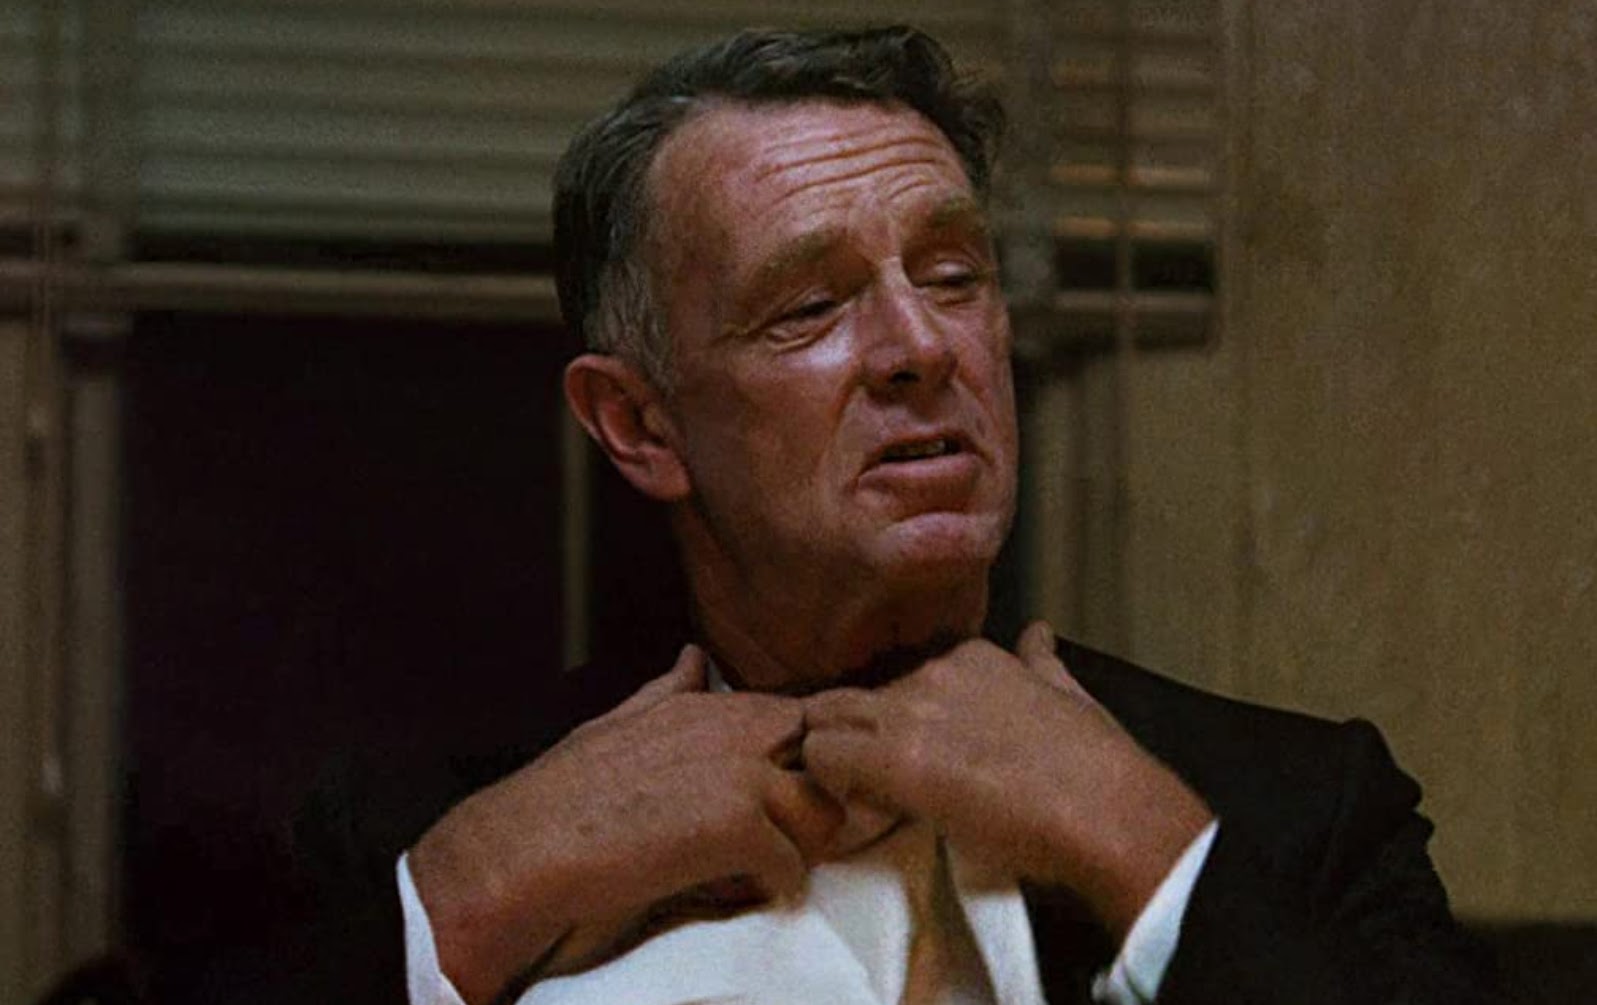 Actor, sailor, and spy Sterling Hayden starred in The Godfather